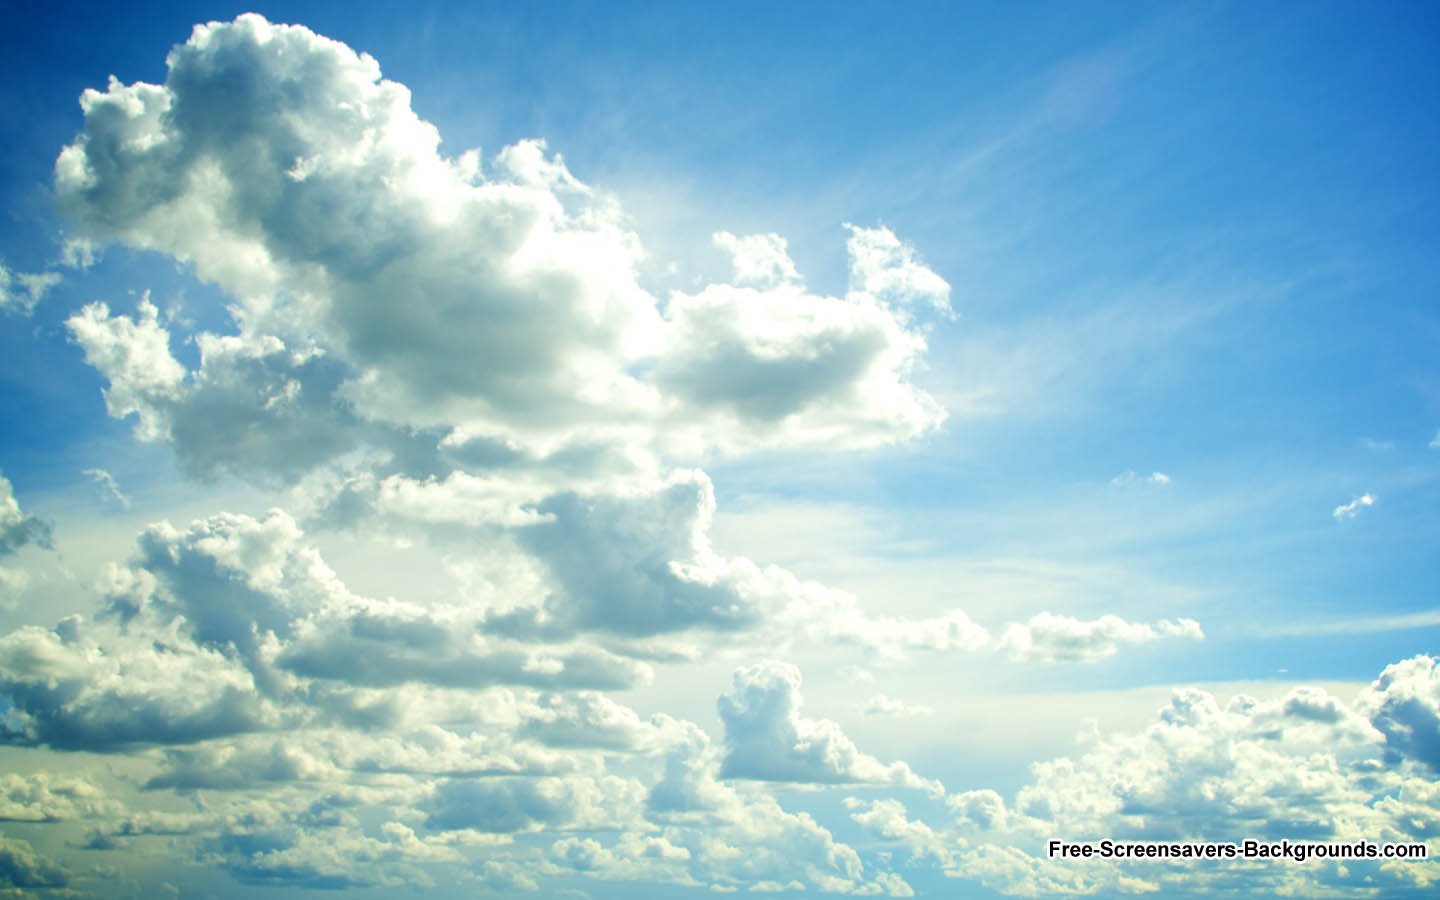 Clouds   Free Screensavers and Backgrounds